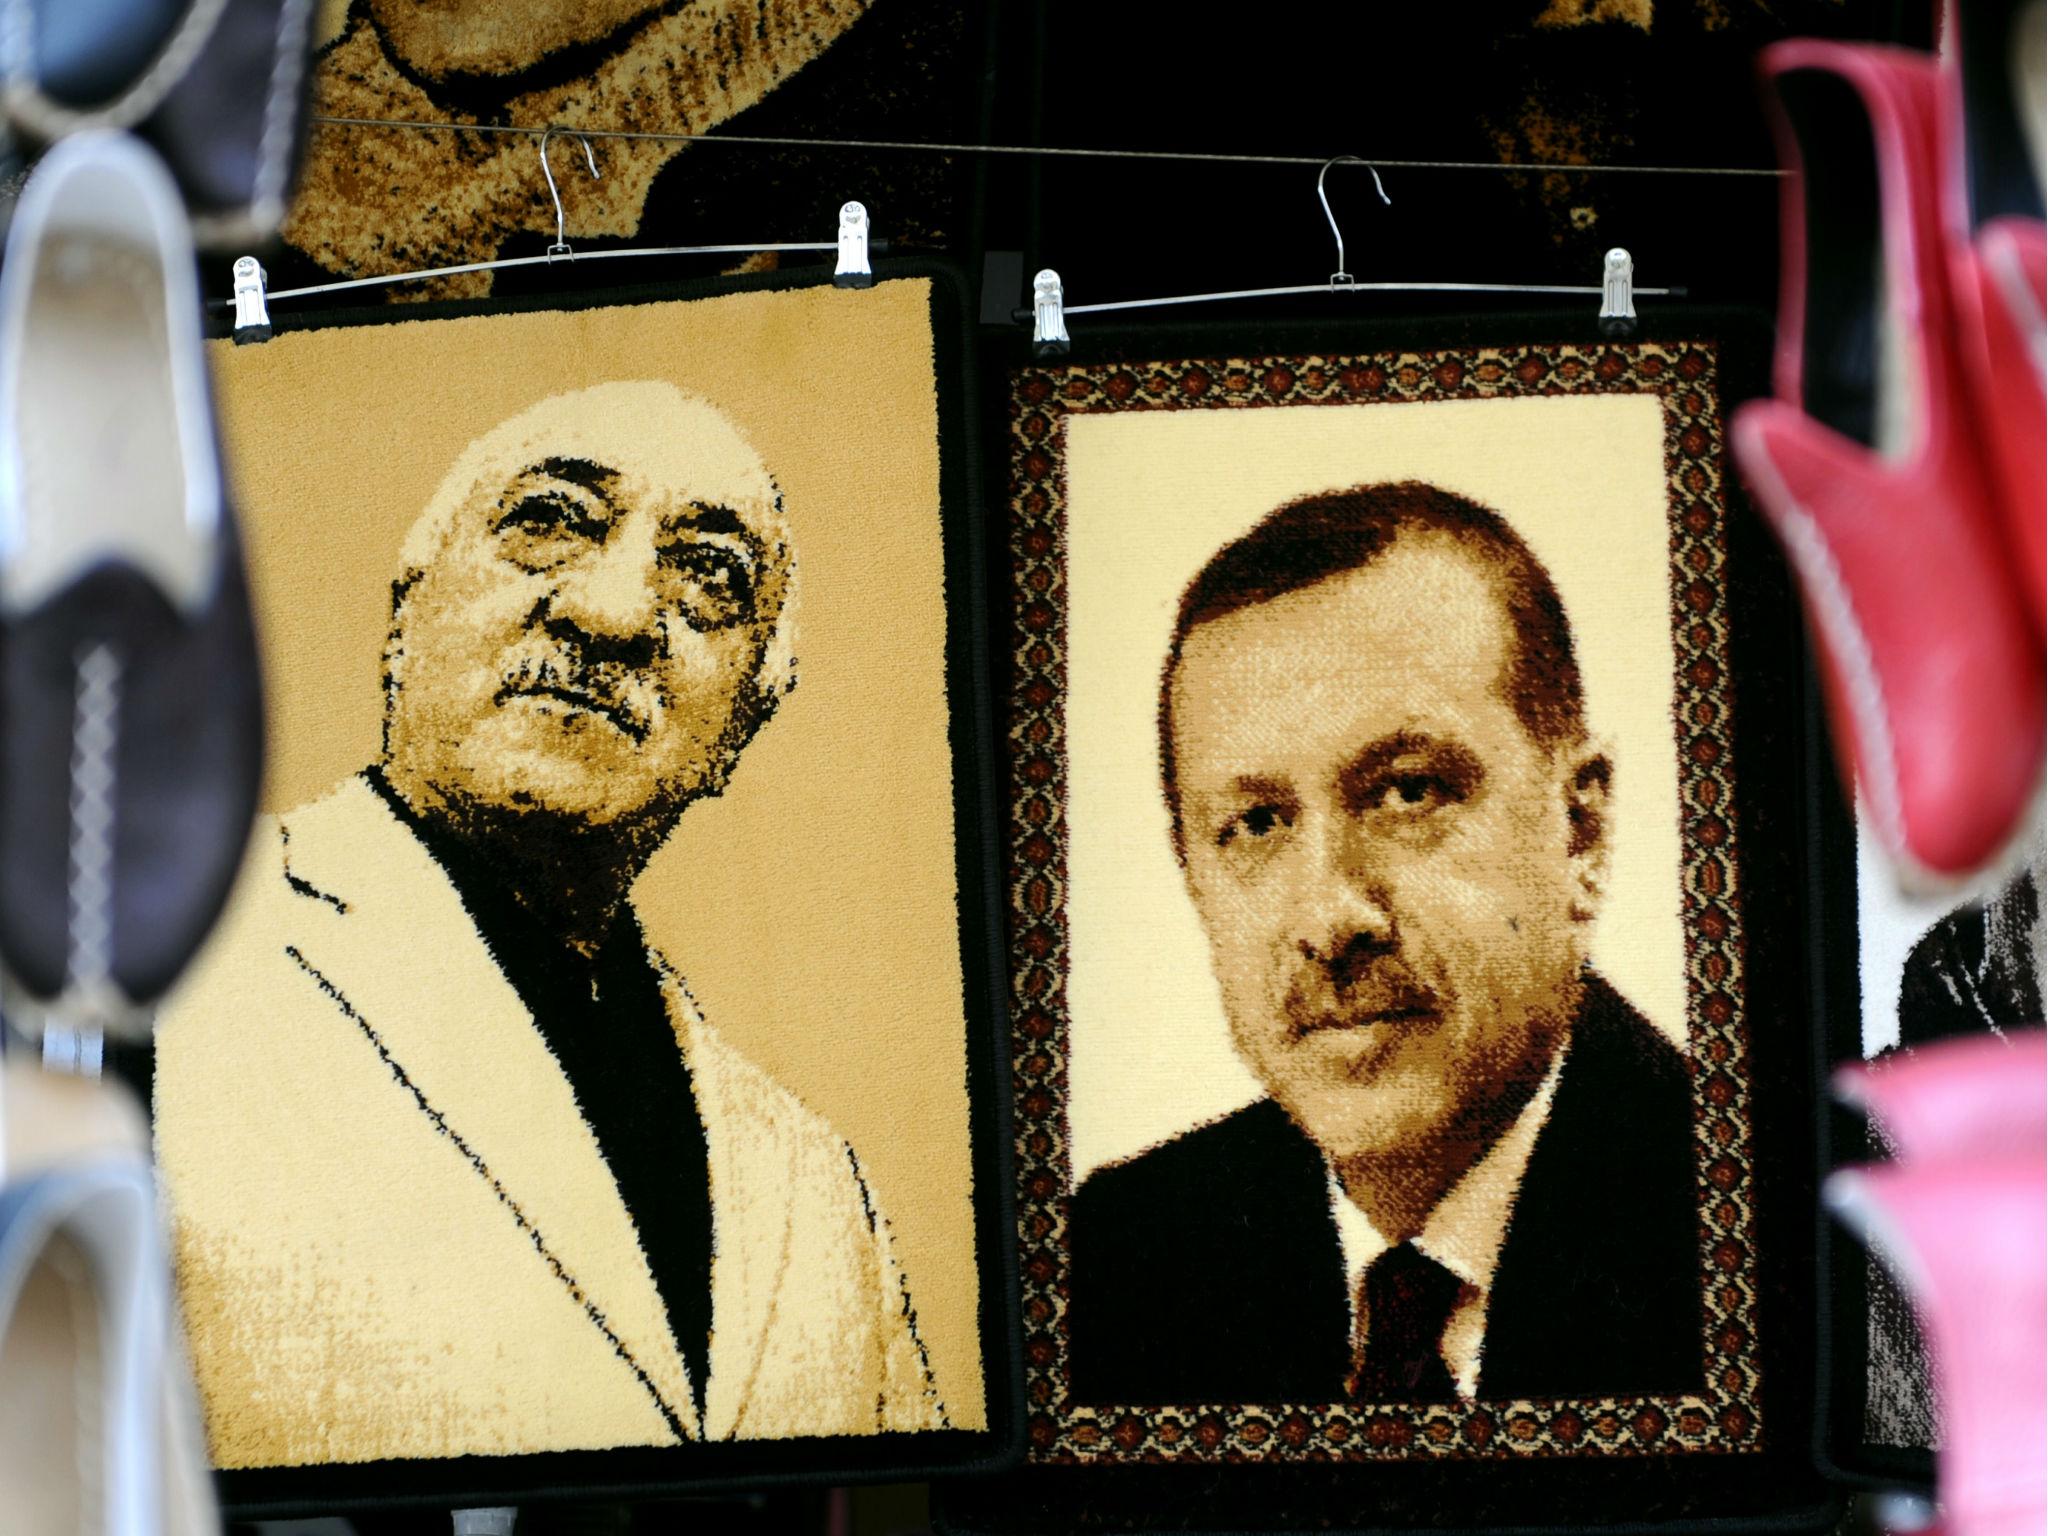 Embroidered images of United States-based Turkish cleric Fethullah Gulen (L) and Turkey's Prime Minister Recep Tayyip Erdogan (R) are displayed in a shop in the Gaziantep market on January 17, 2014